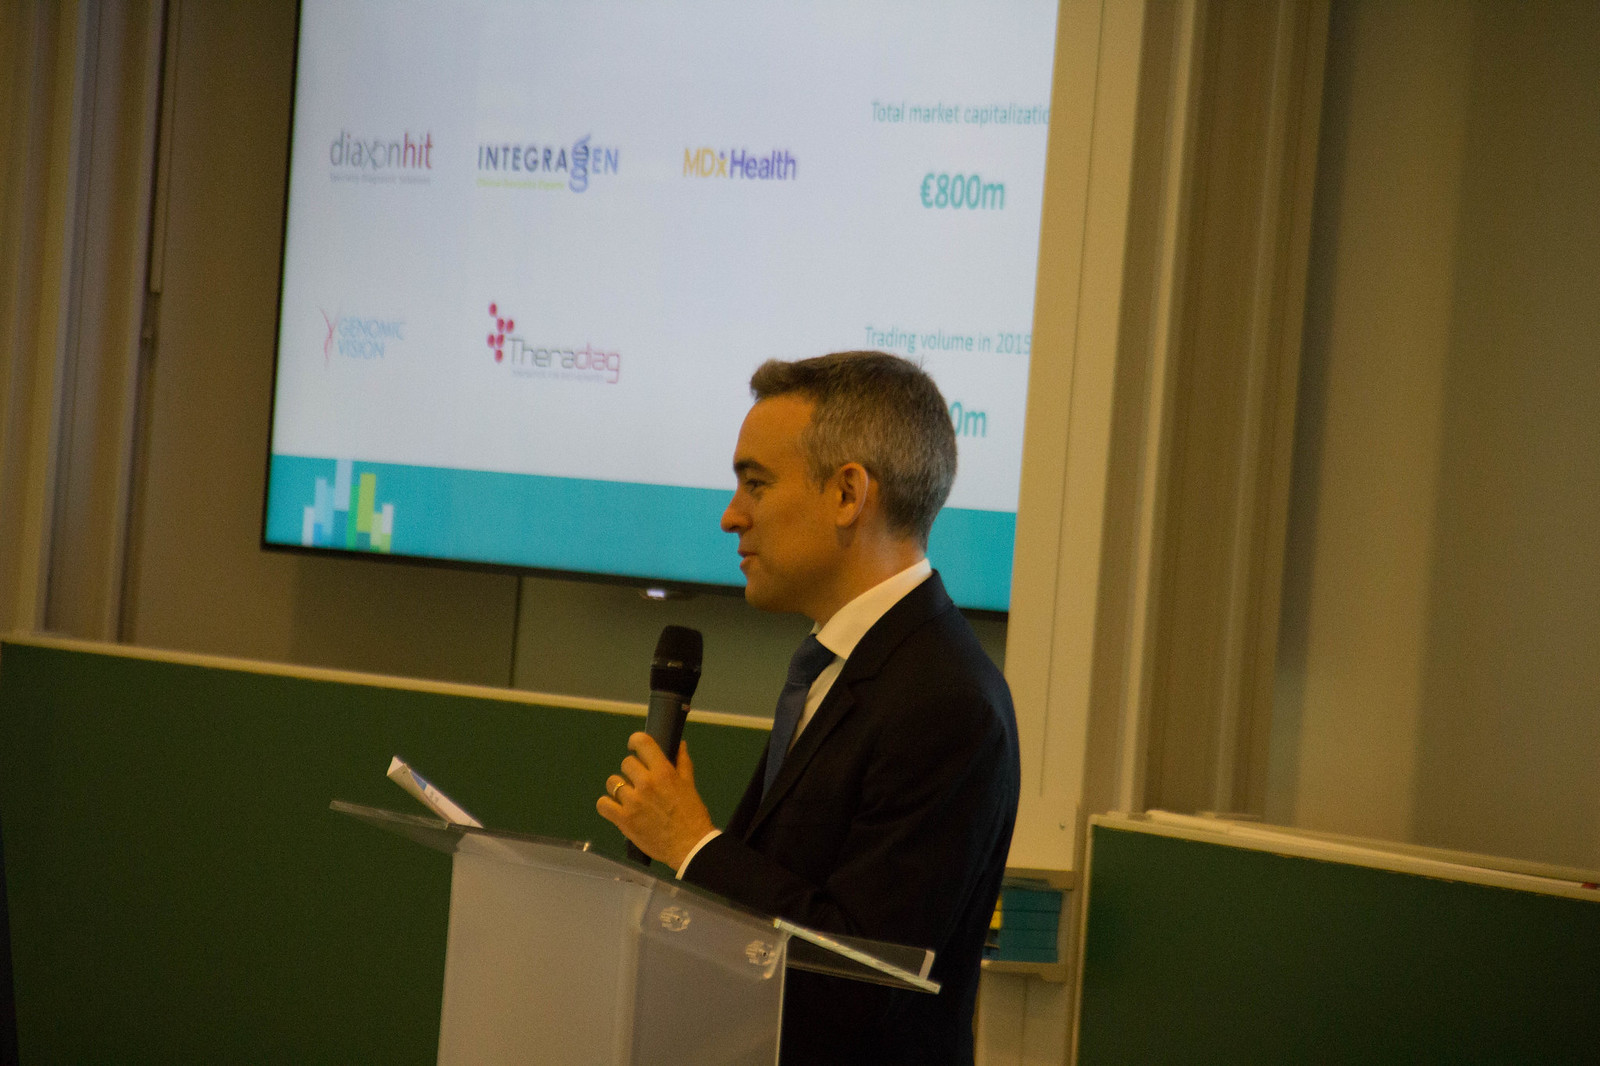 36 Frederic Martineau of Euronext